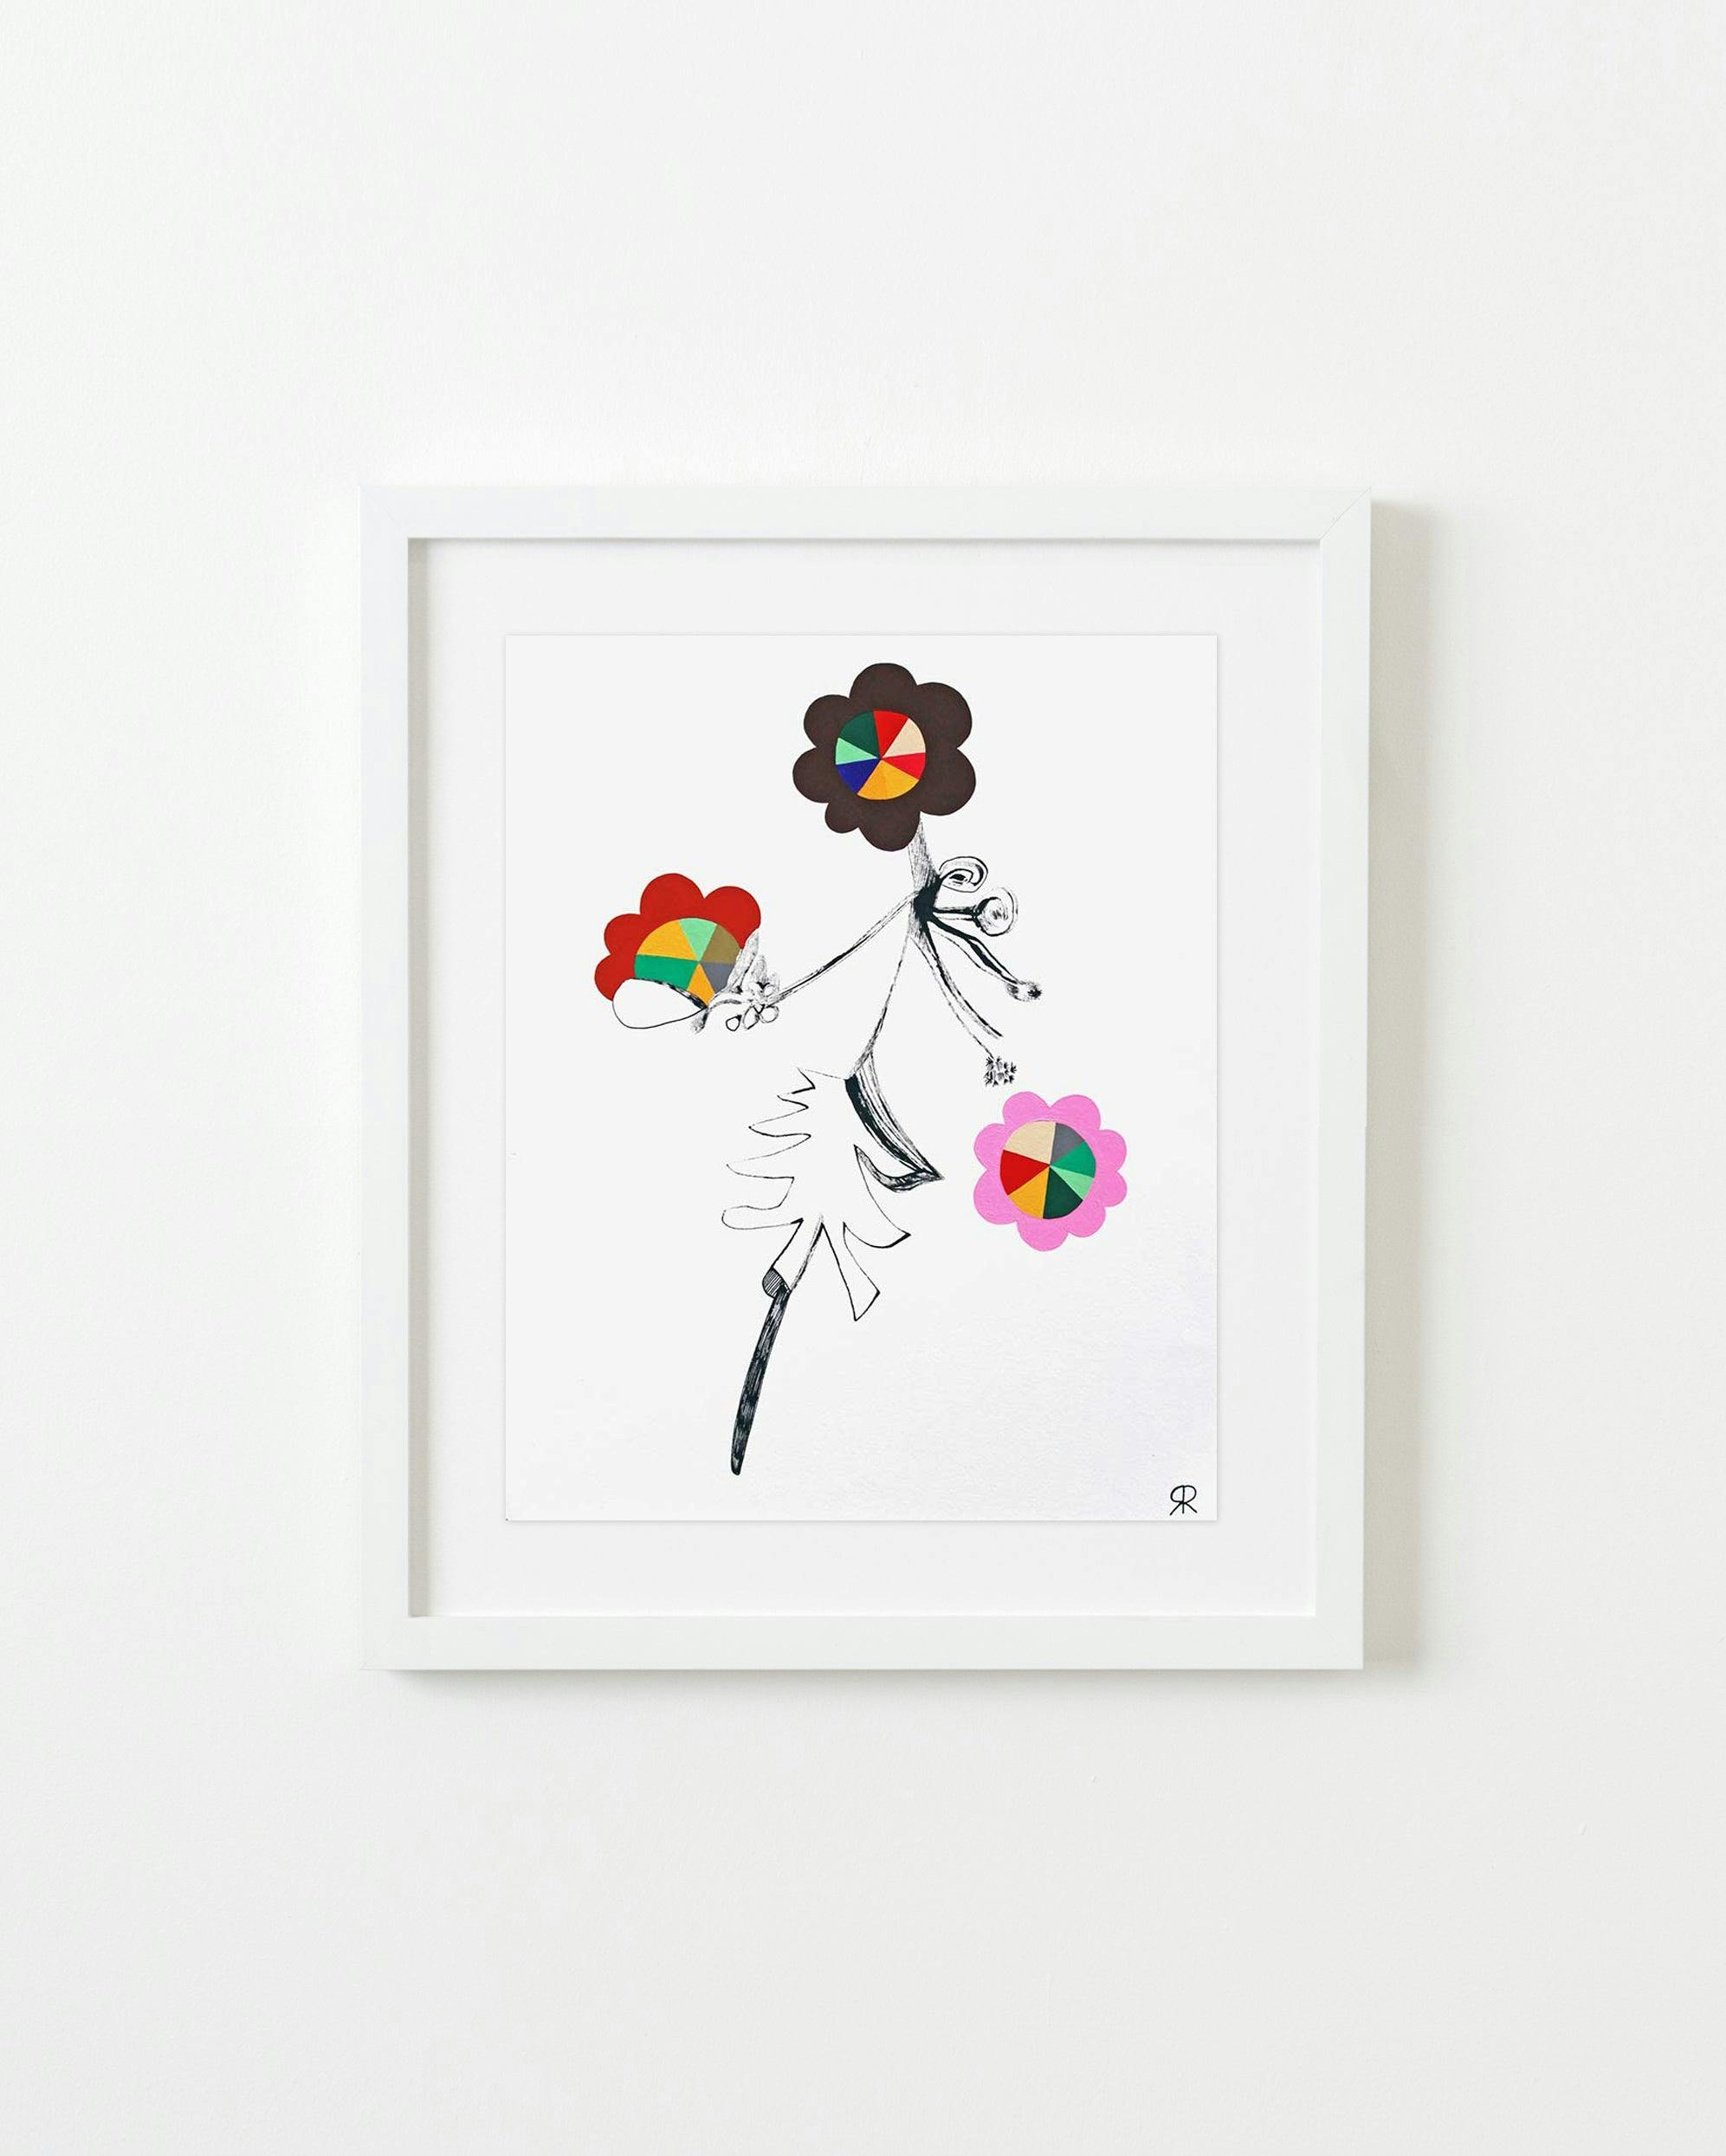 Drawing by Rebeca Raney titled "Flower Drawing #10".